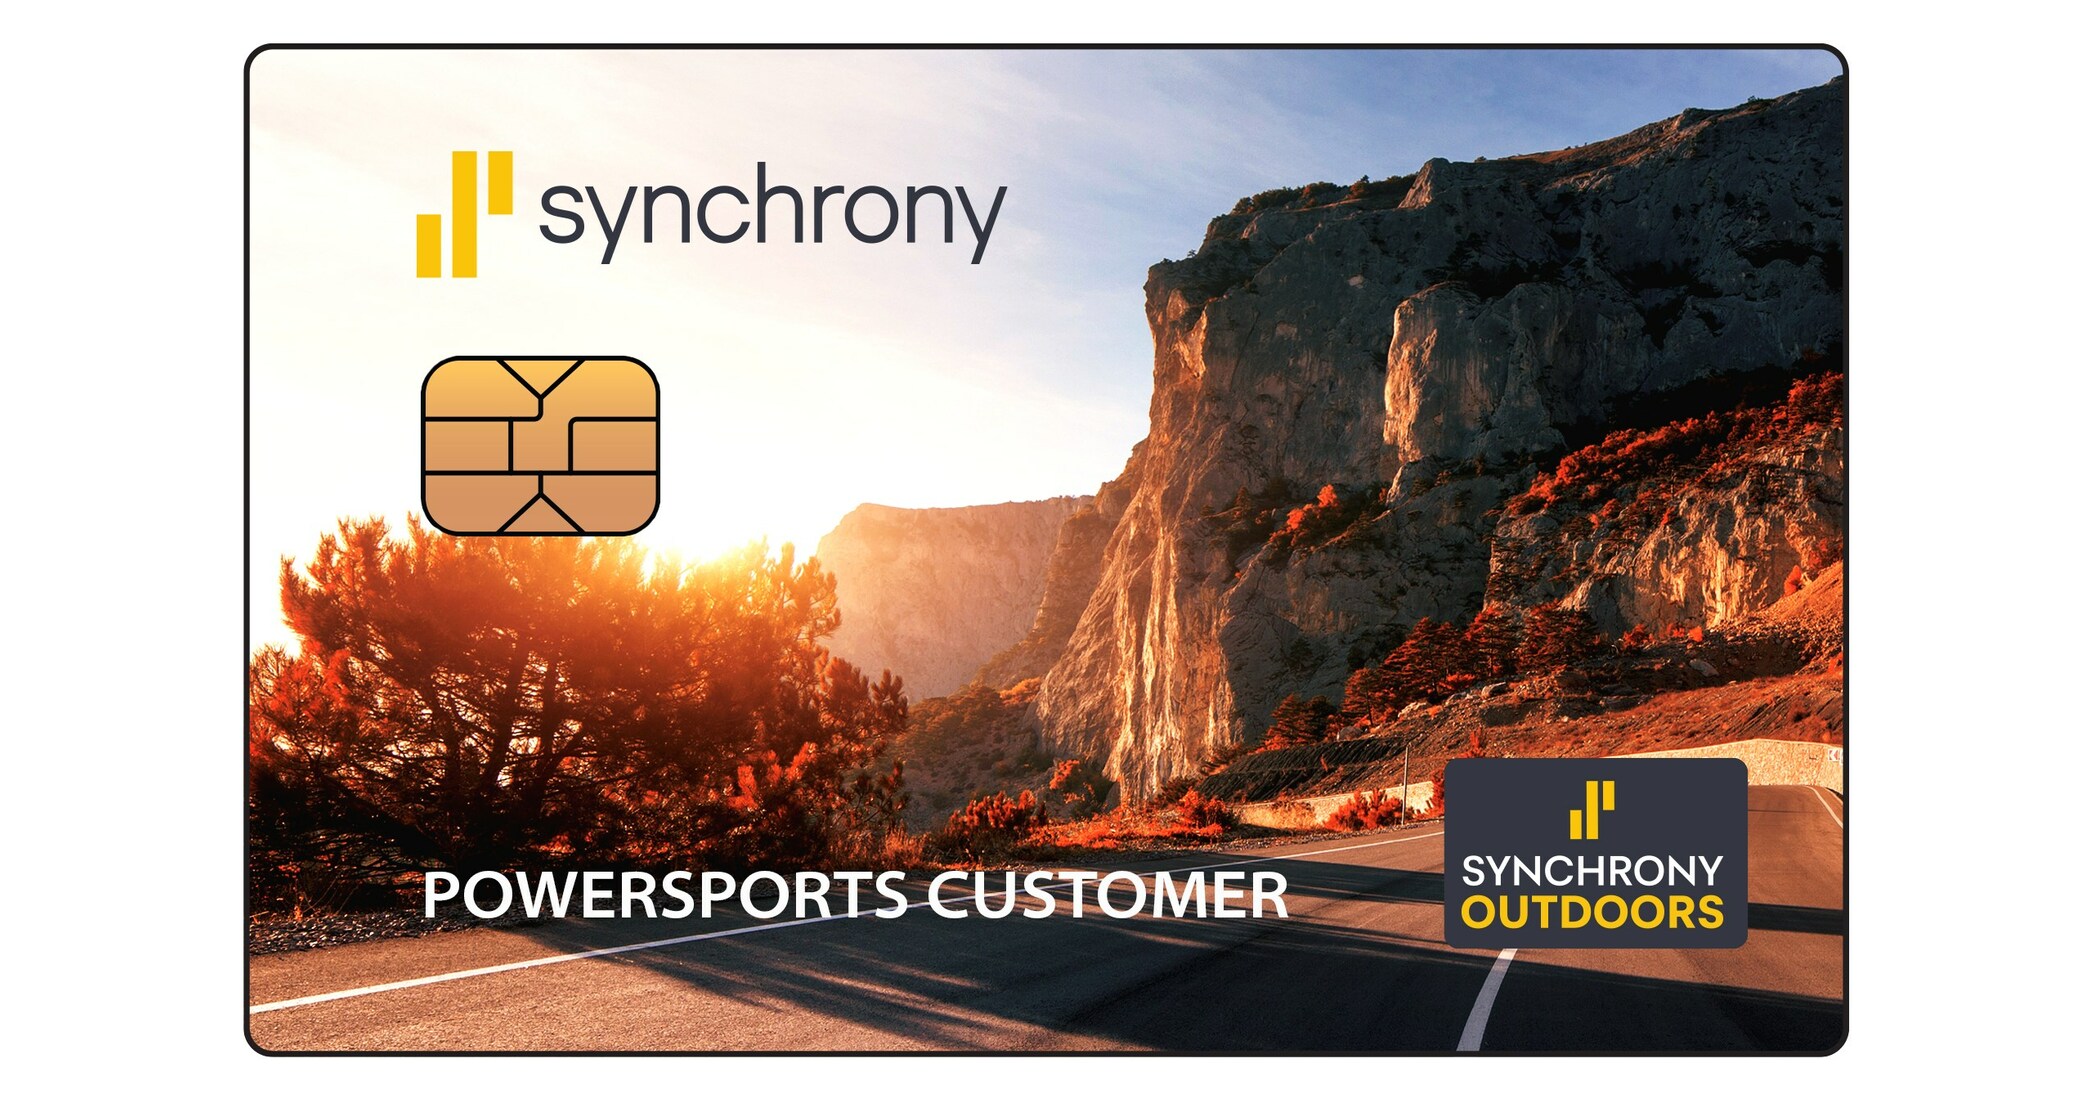 New Synchrony Outdoors Credit Card